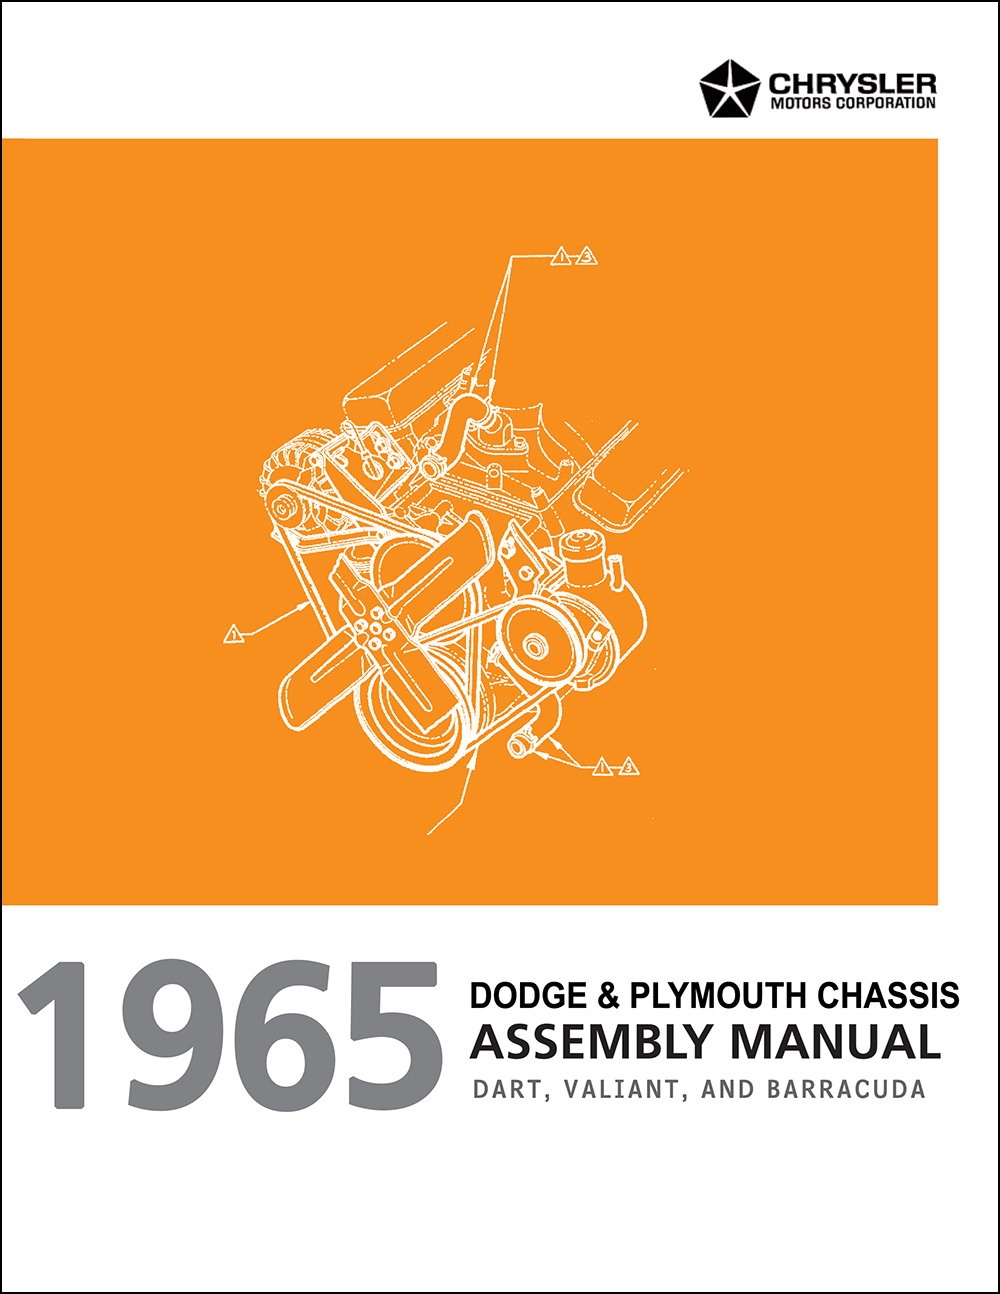 1965 Barracuda, Valiant, and Dart Chassis Assembly Manual Reprint Dodge Plymouth